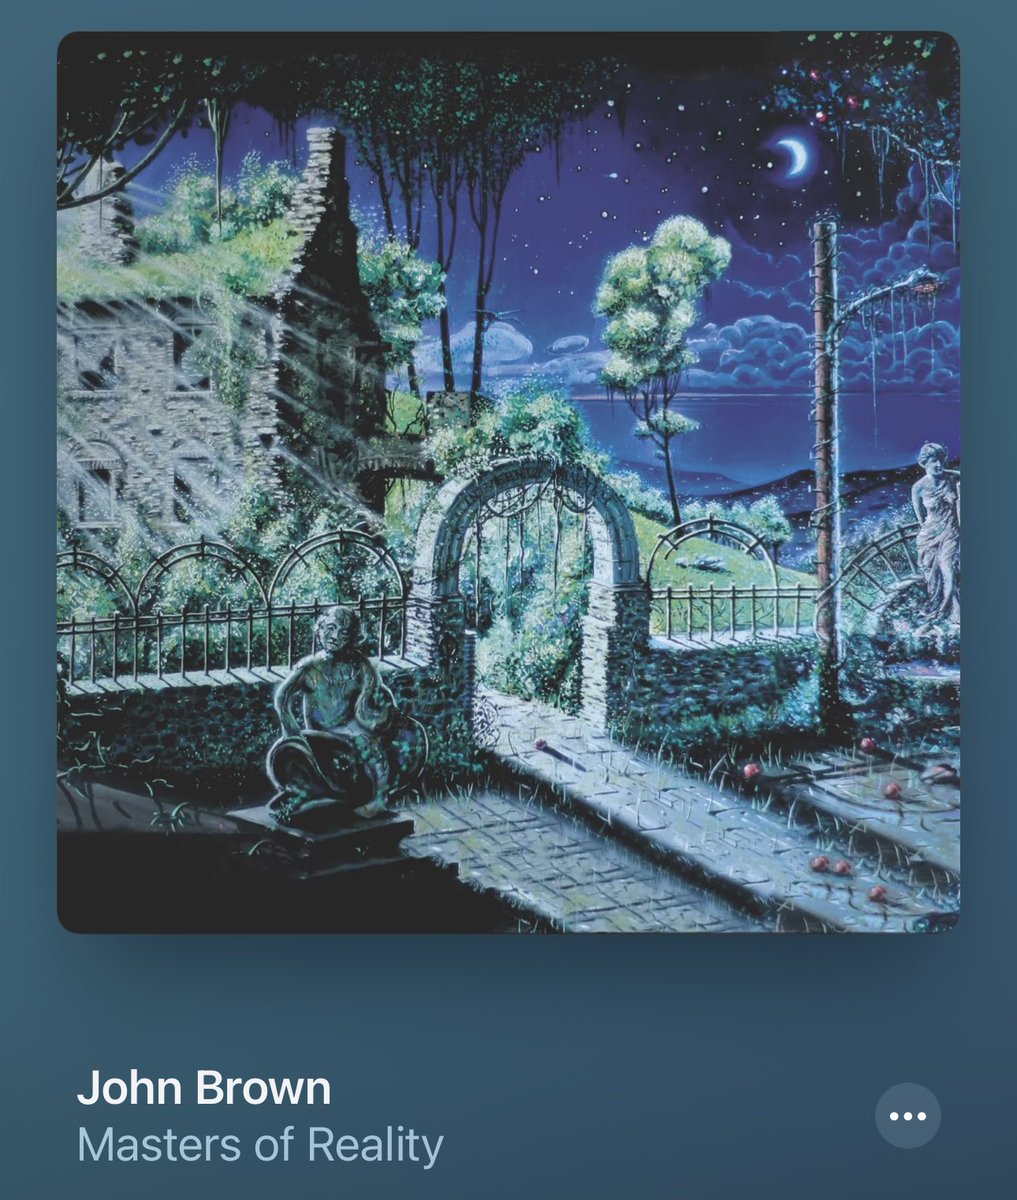 Morning friends!

Who doesn’t love some Masters of Reality!?

This self titled LP in particular’s an absolute cracker, chock full of top tracks including my personal slow jig dancing fave ‘John Brown’

Hope your weekend ends right & the new one’s a ripper mates!
#MastersOfReality